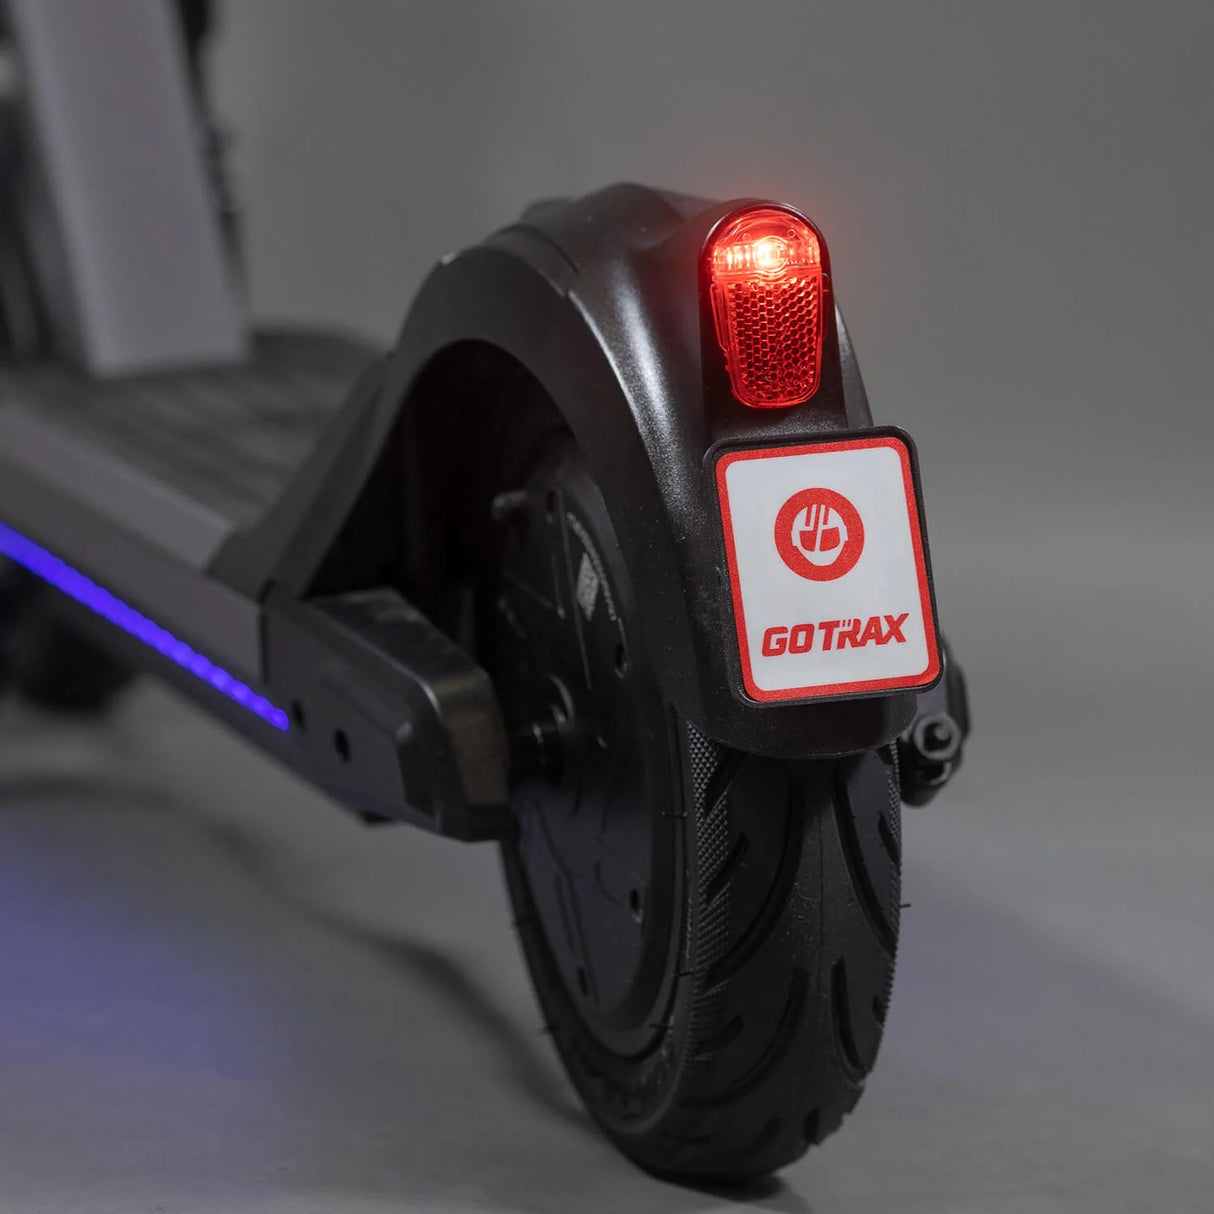 Gotrax G6 electric scooter